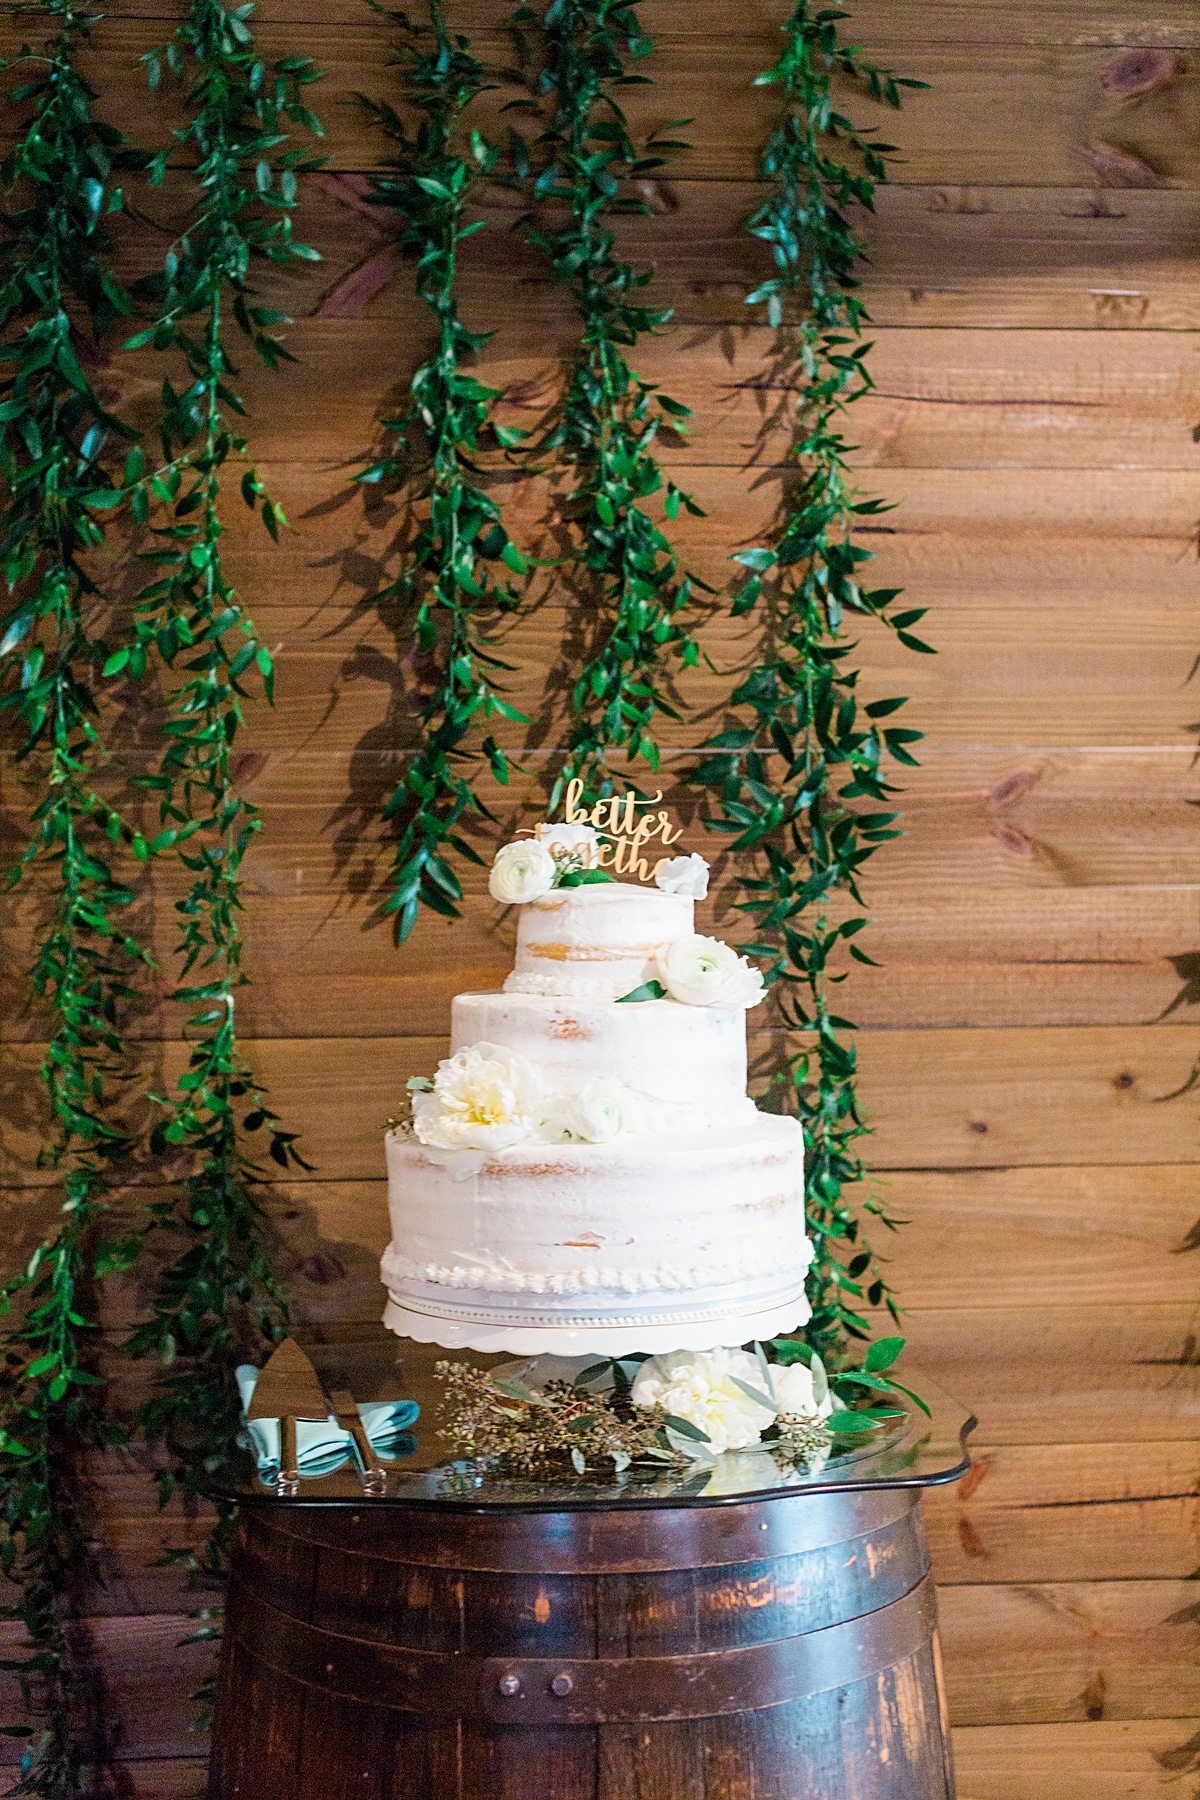 rustic wood pallet backdrop with hanging greenery for wedding cake display table 